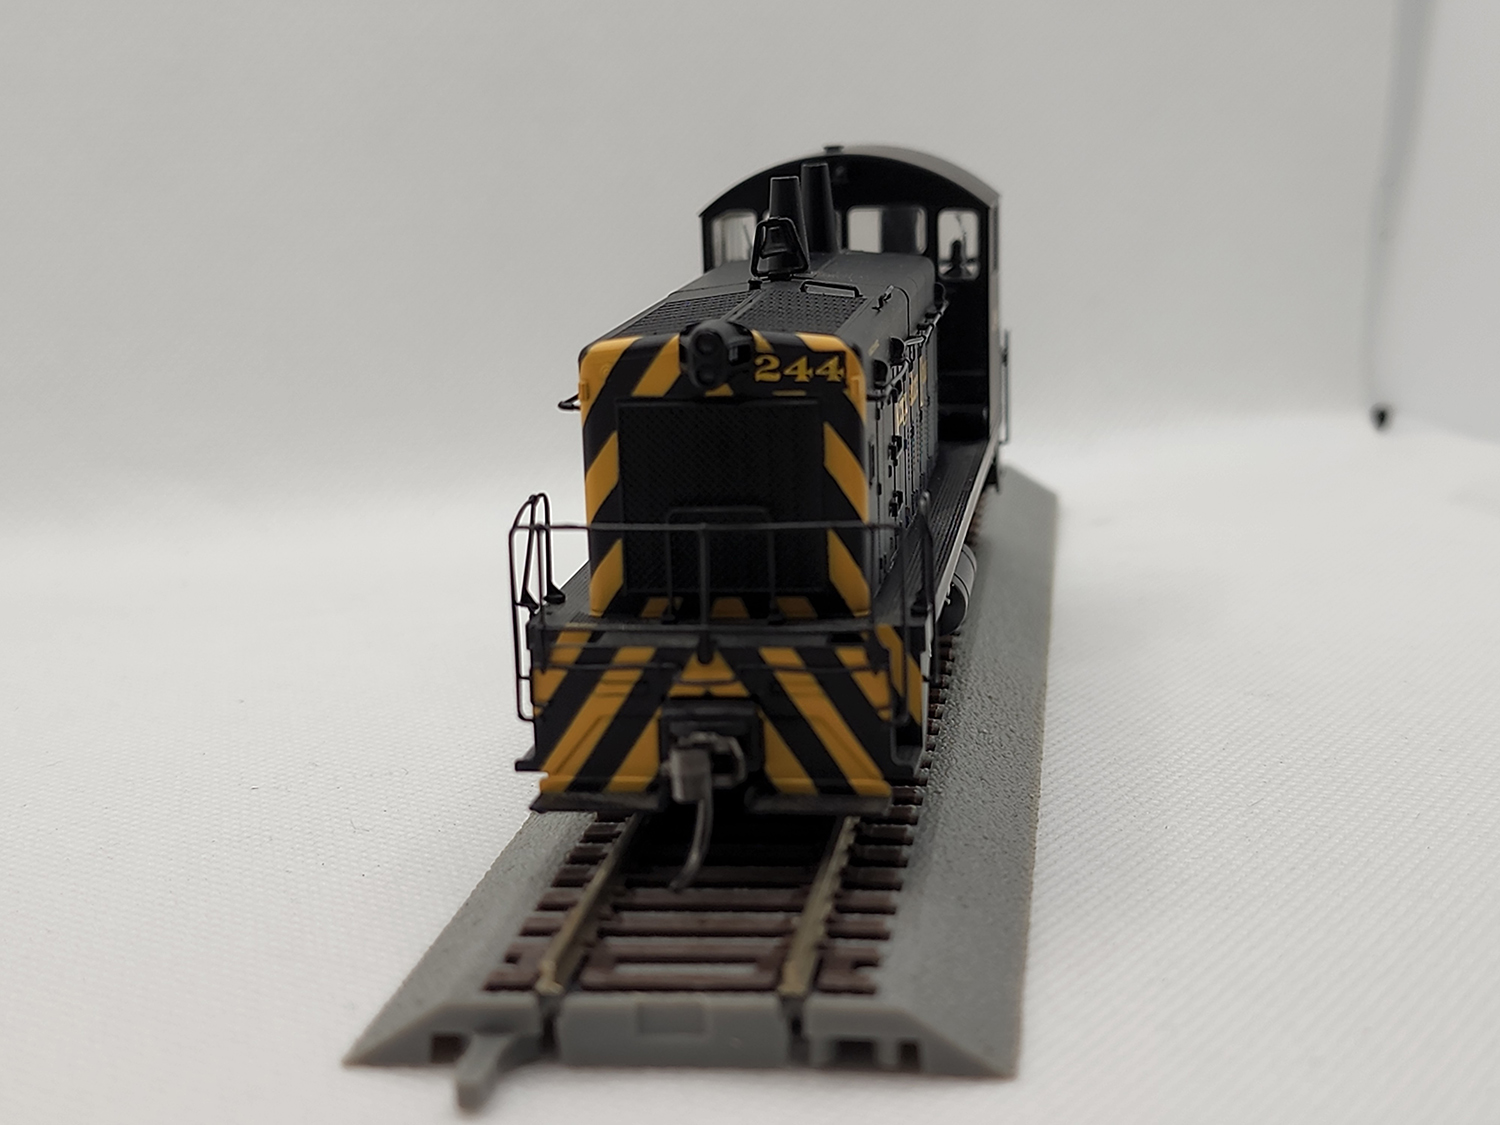 7th view of the Life-Like Nickel Plate Road SW9 Diesel Locomotive #244 in my HO-scale Collection